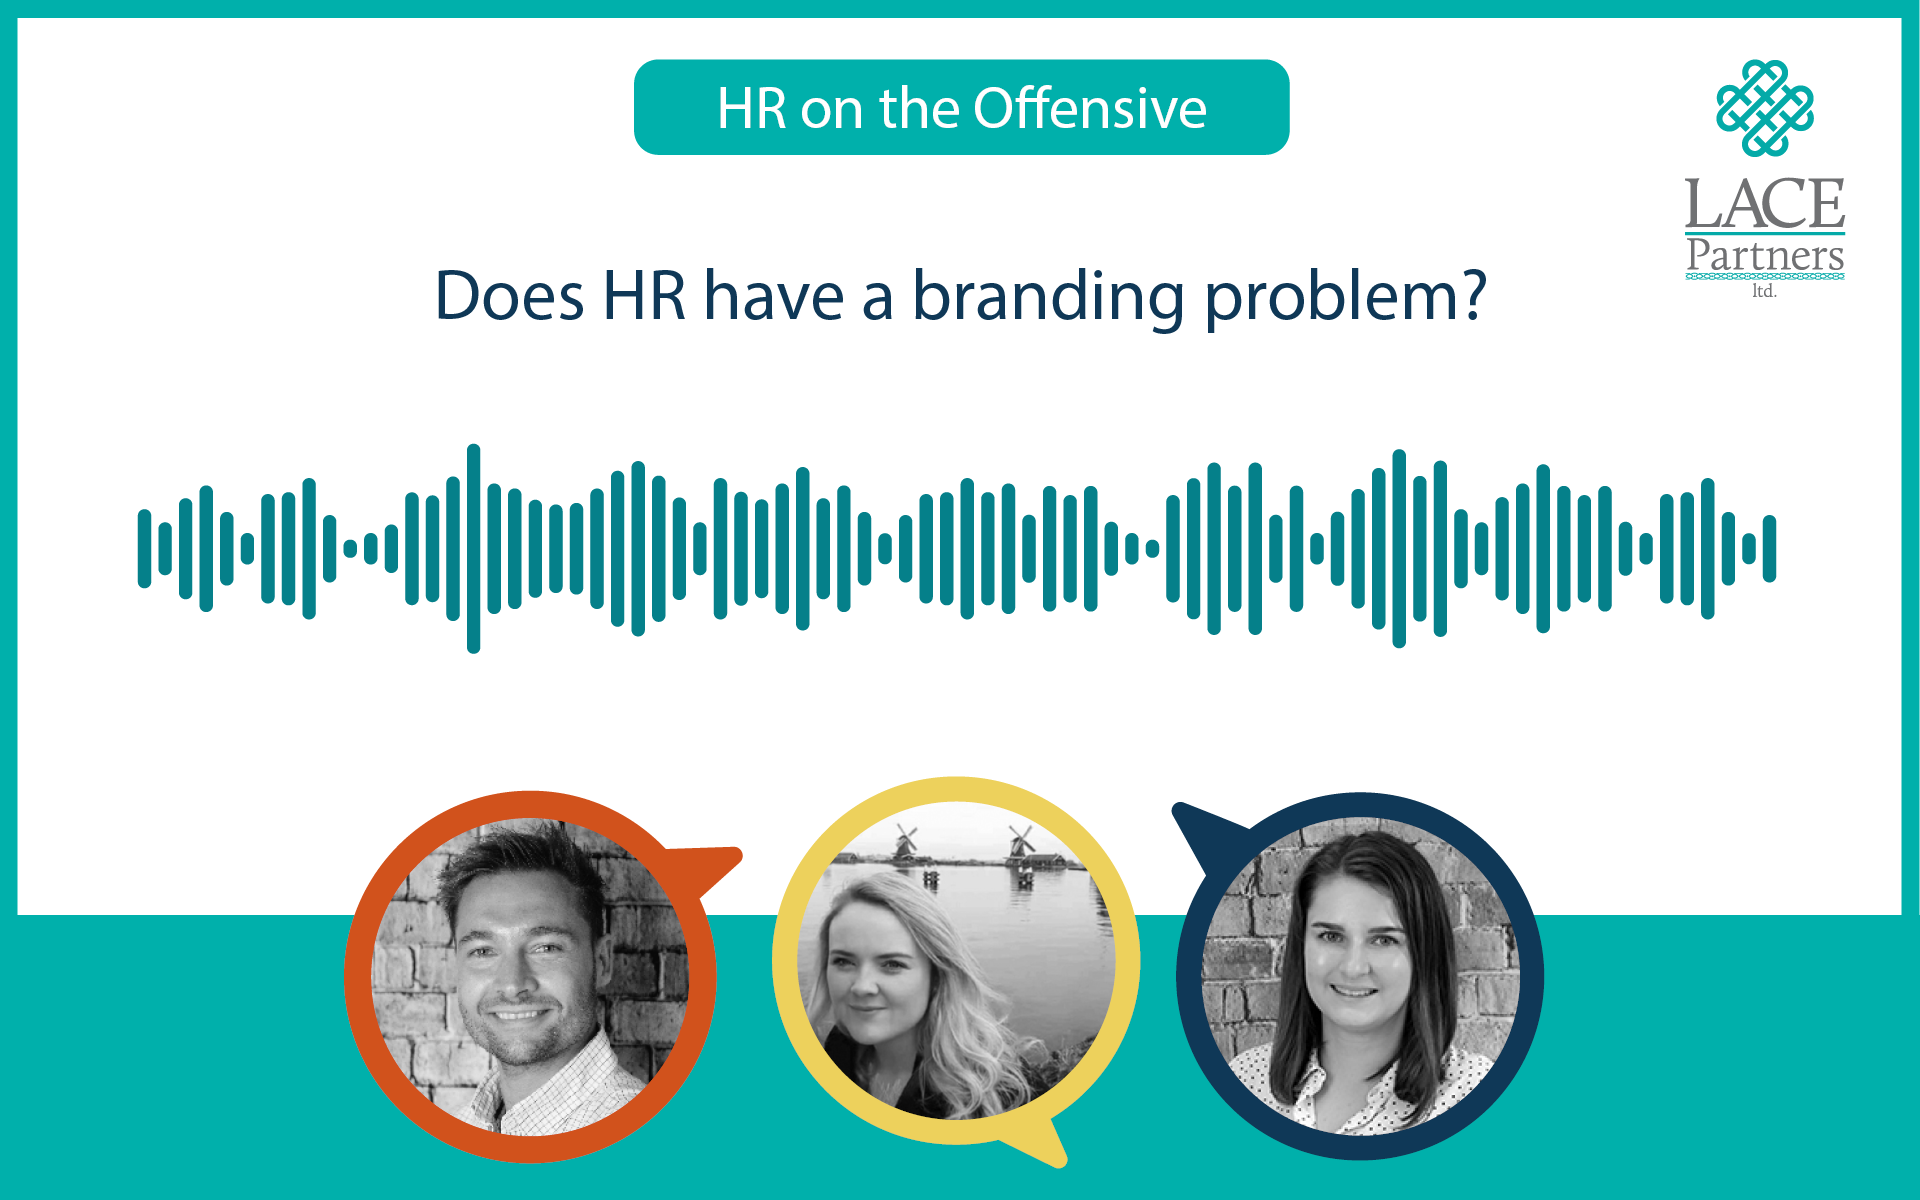 Does HR have a branding problem?